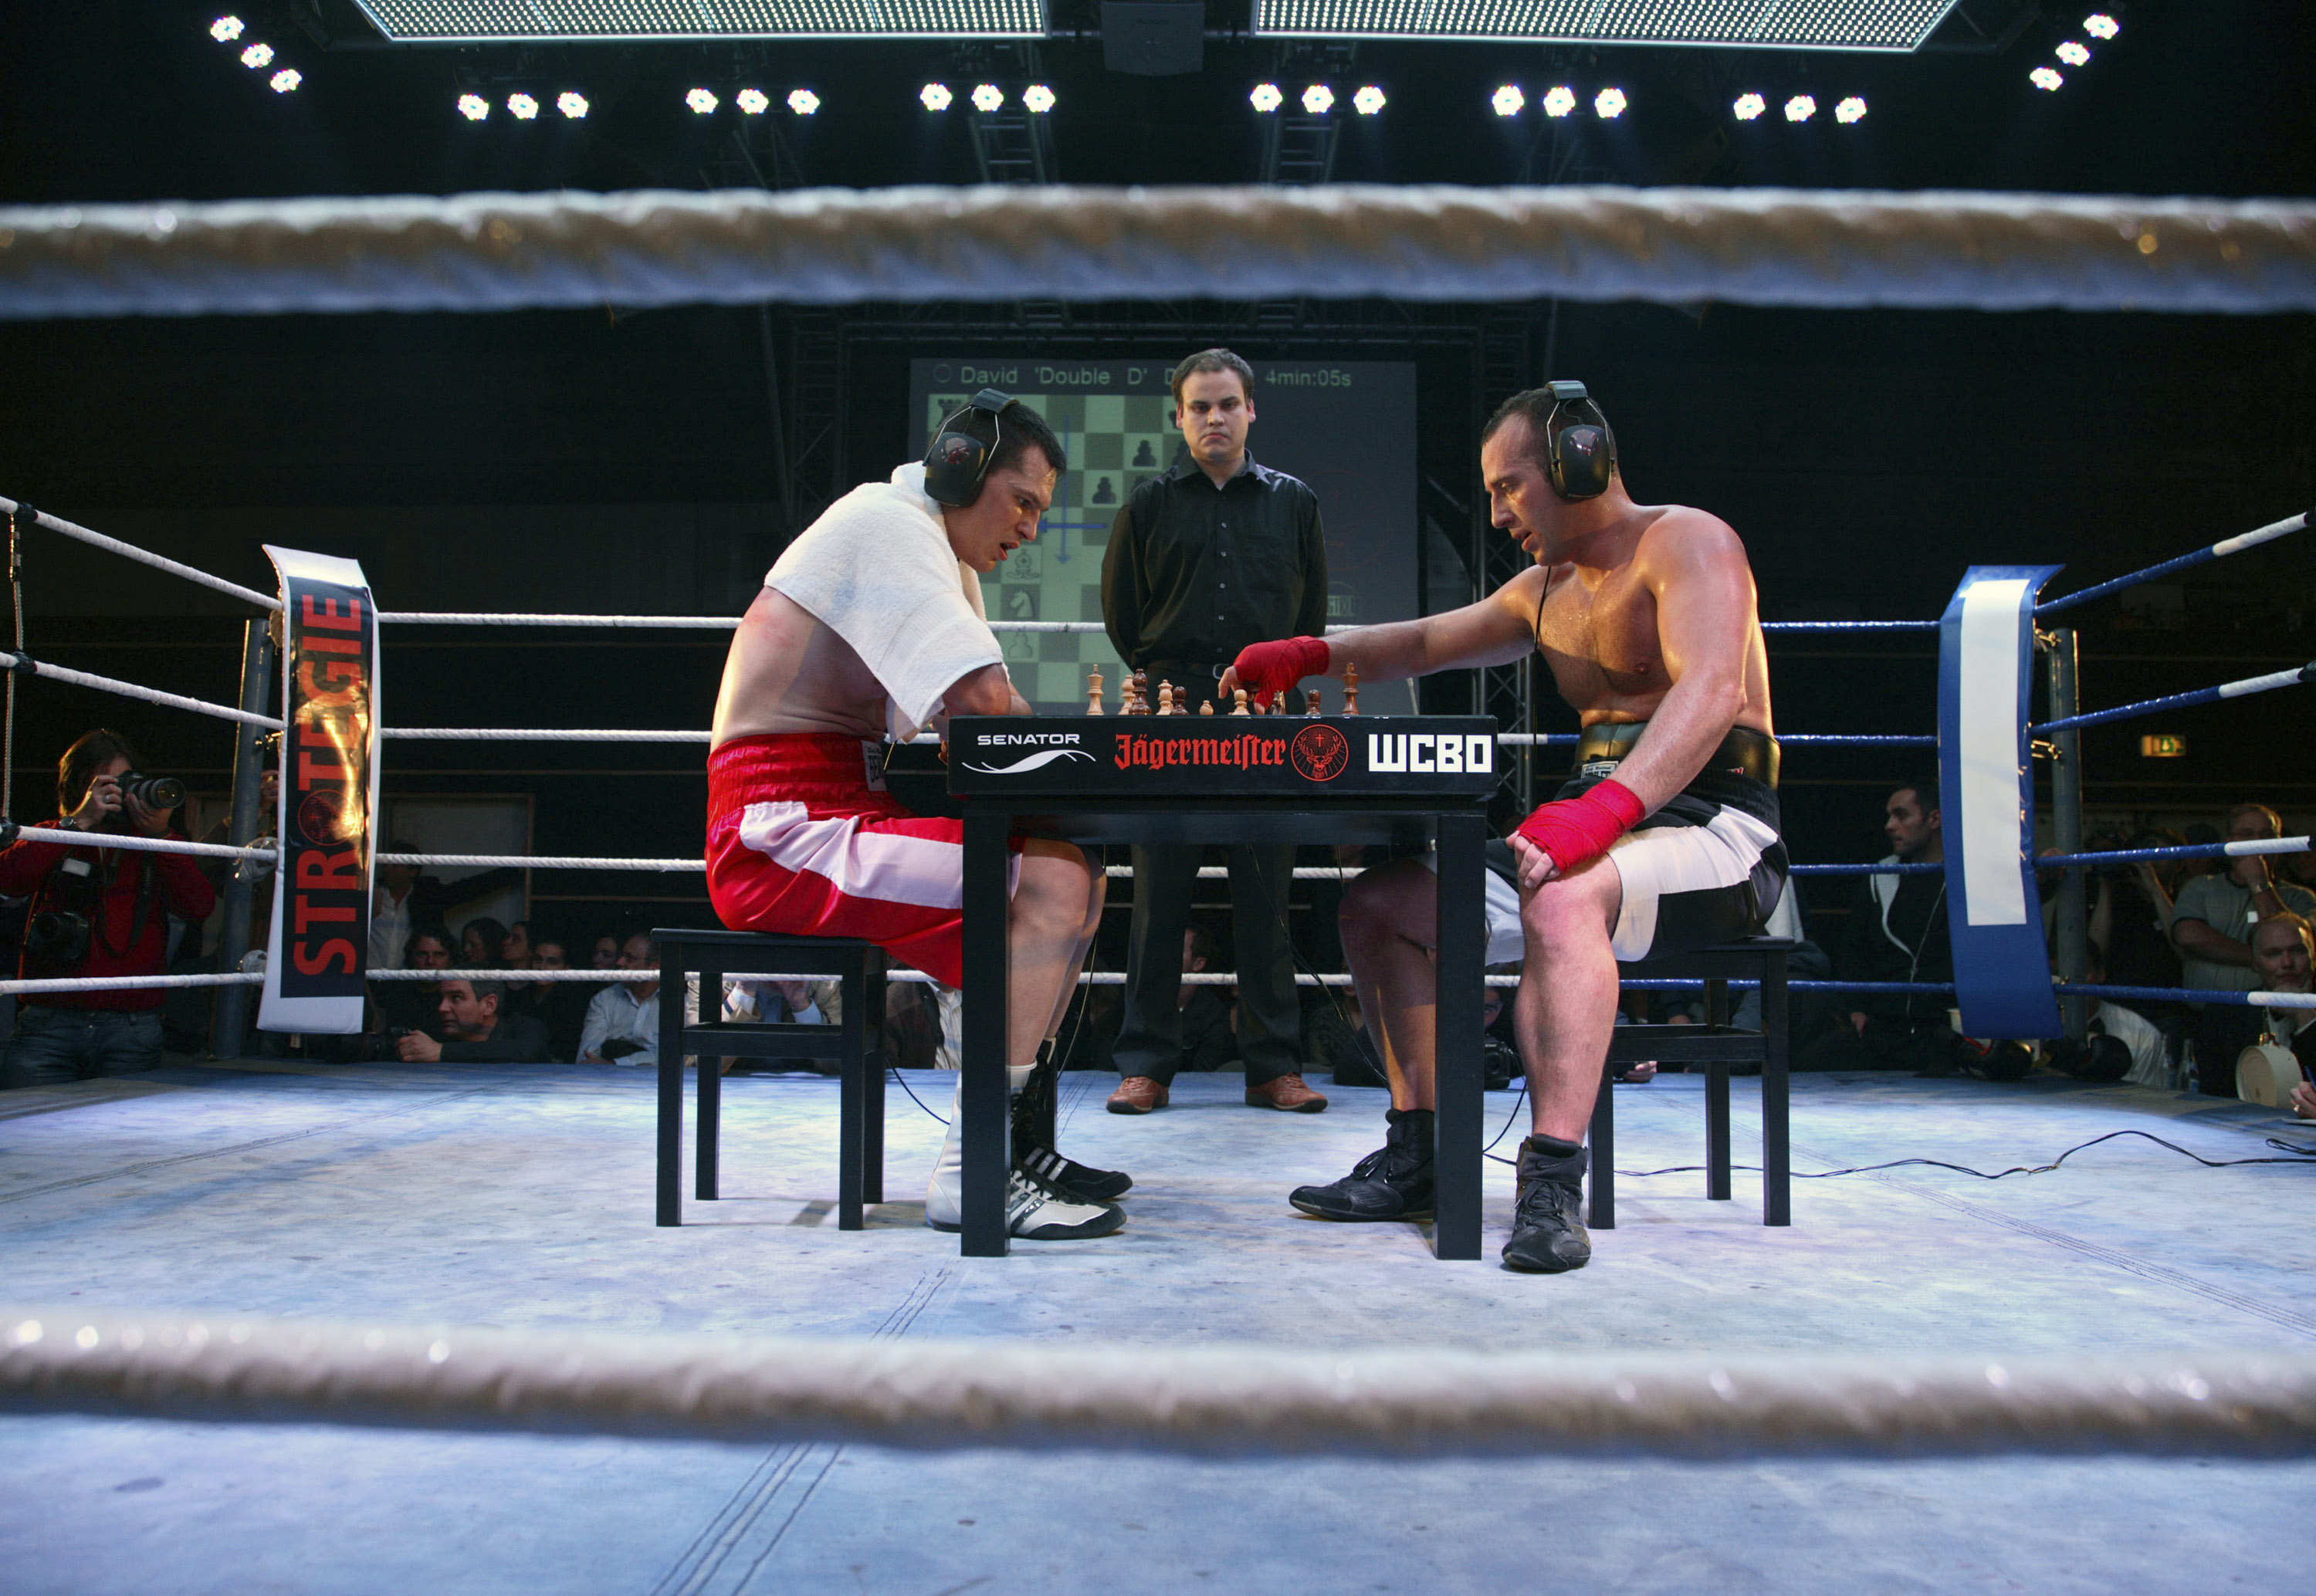 Chess Boxing: The Sweet Science Meets the Royal Game - Breaking Muscle